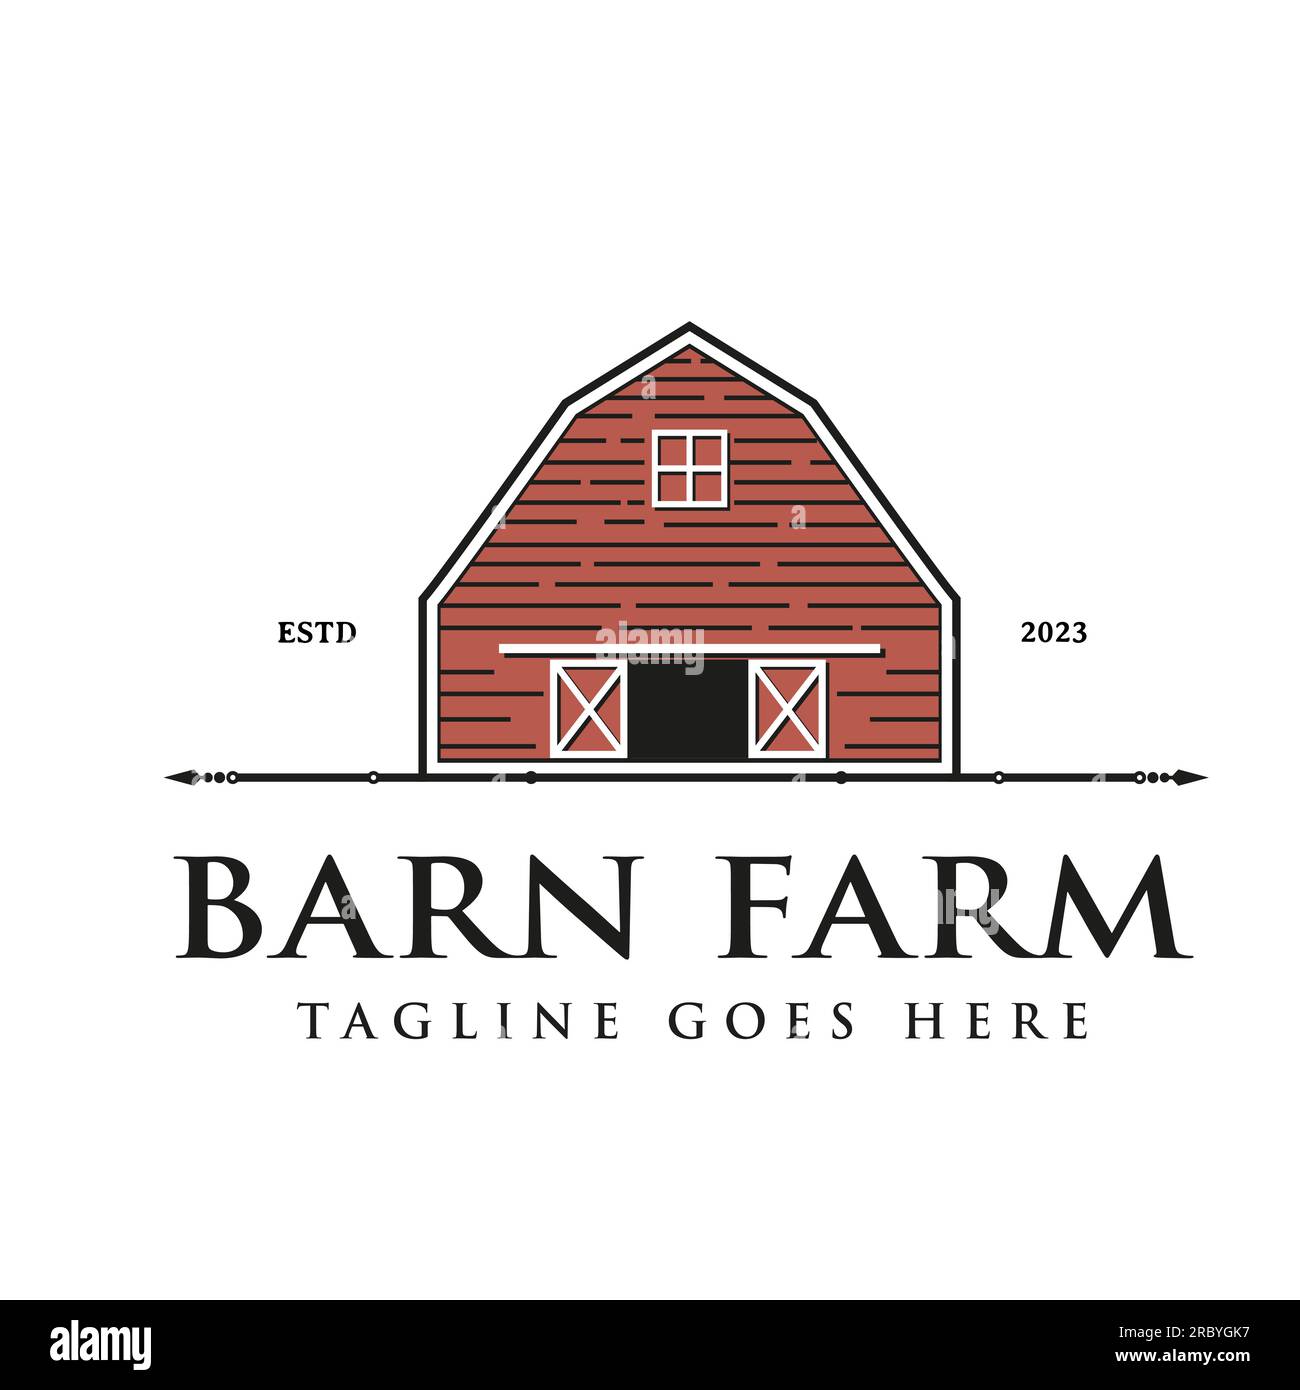 Farm barn vintage style wooden country western country house traditional building icon symbol. Vintage Agriculture Logo Design Stock Vector